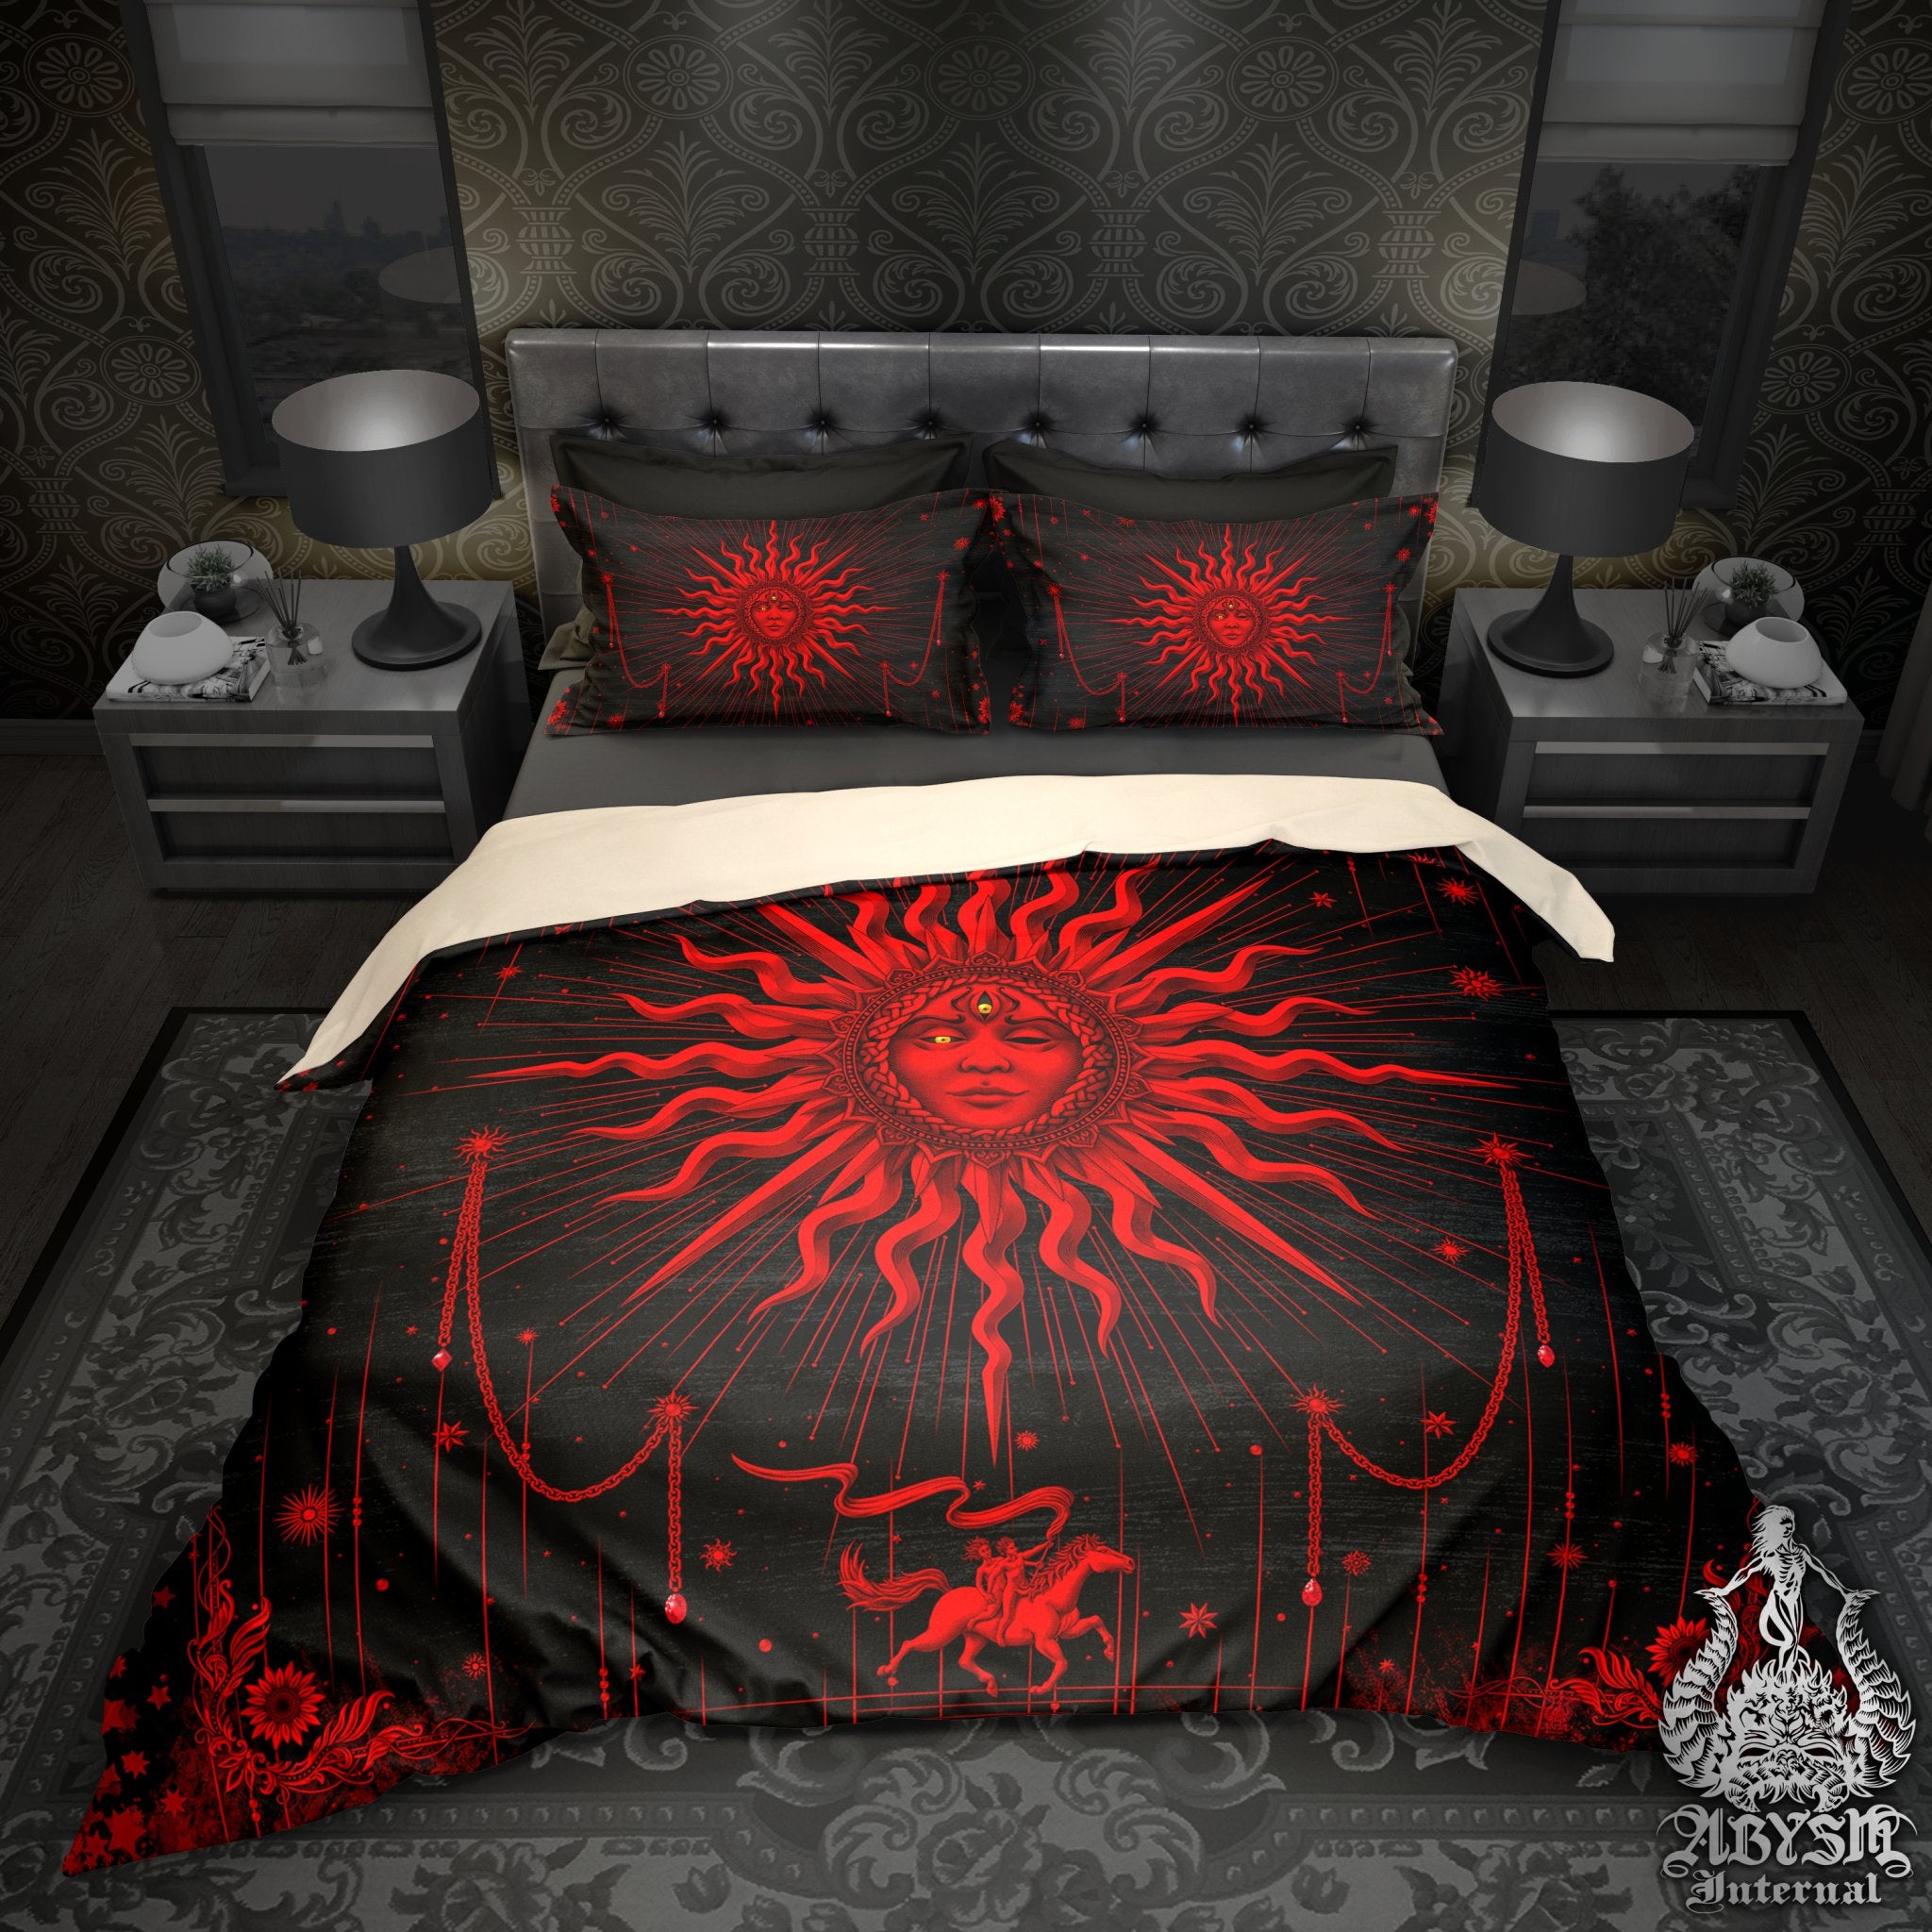 Gothic Sun Duvet Cover, Bed Covering, Esoteric Comforter, Bloody Goth Bedroom Decor King, Queen & Twin Bedding Set - Tarot Arcana Art, Red Black - Abysm Internal